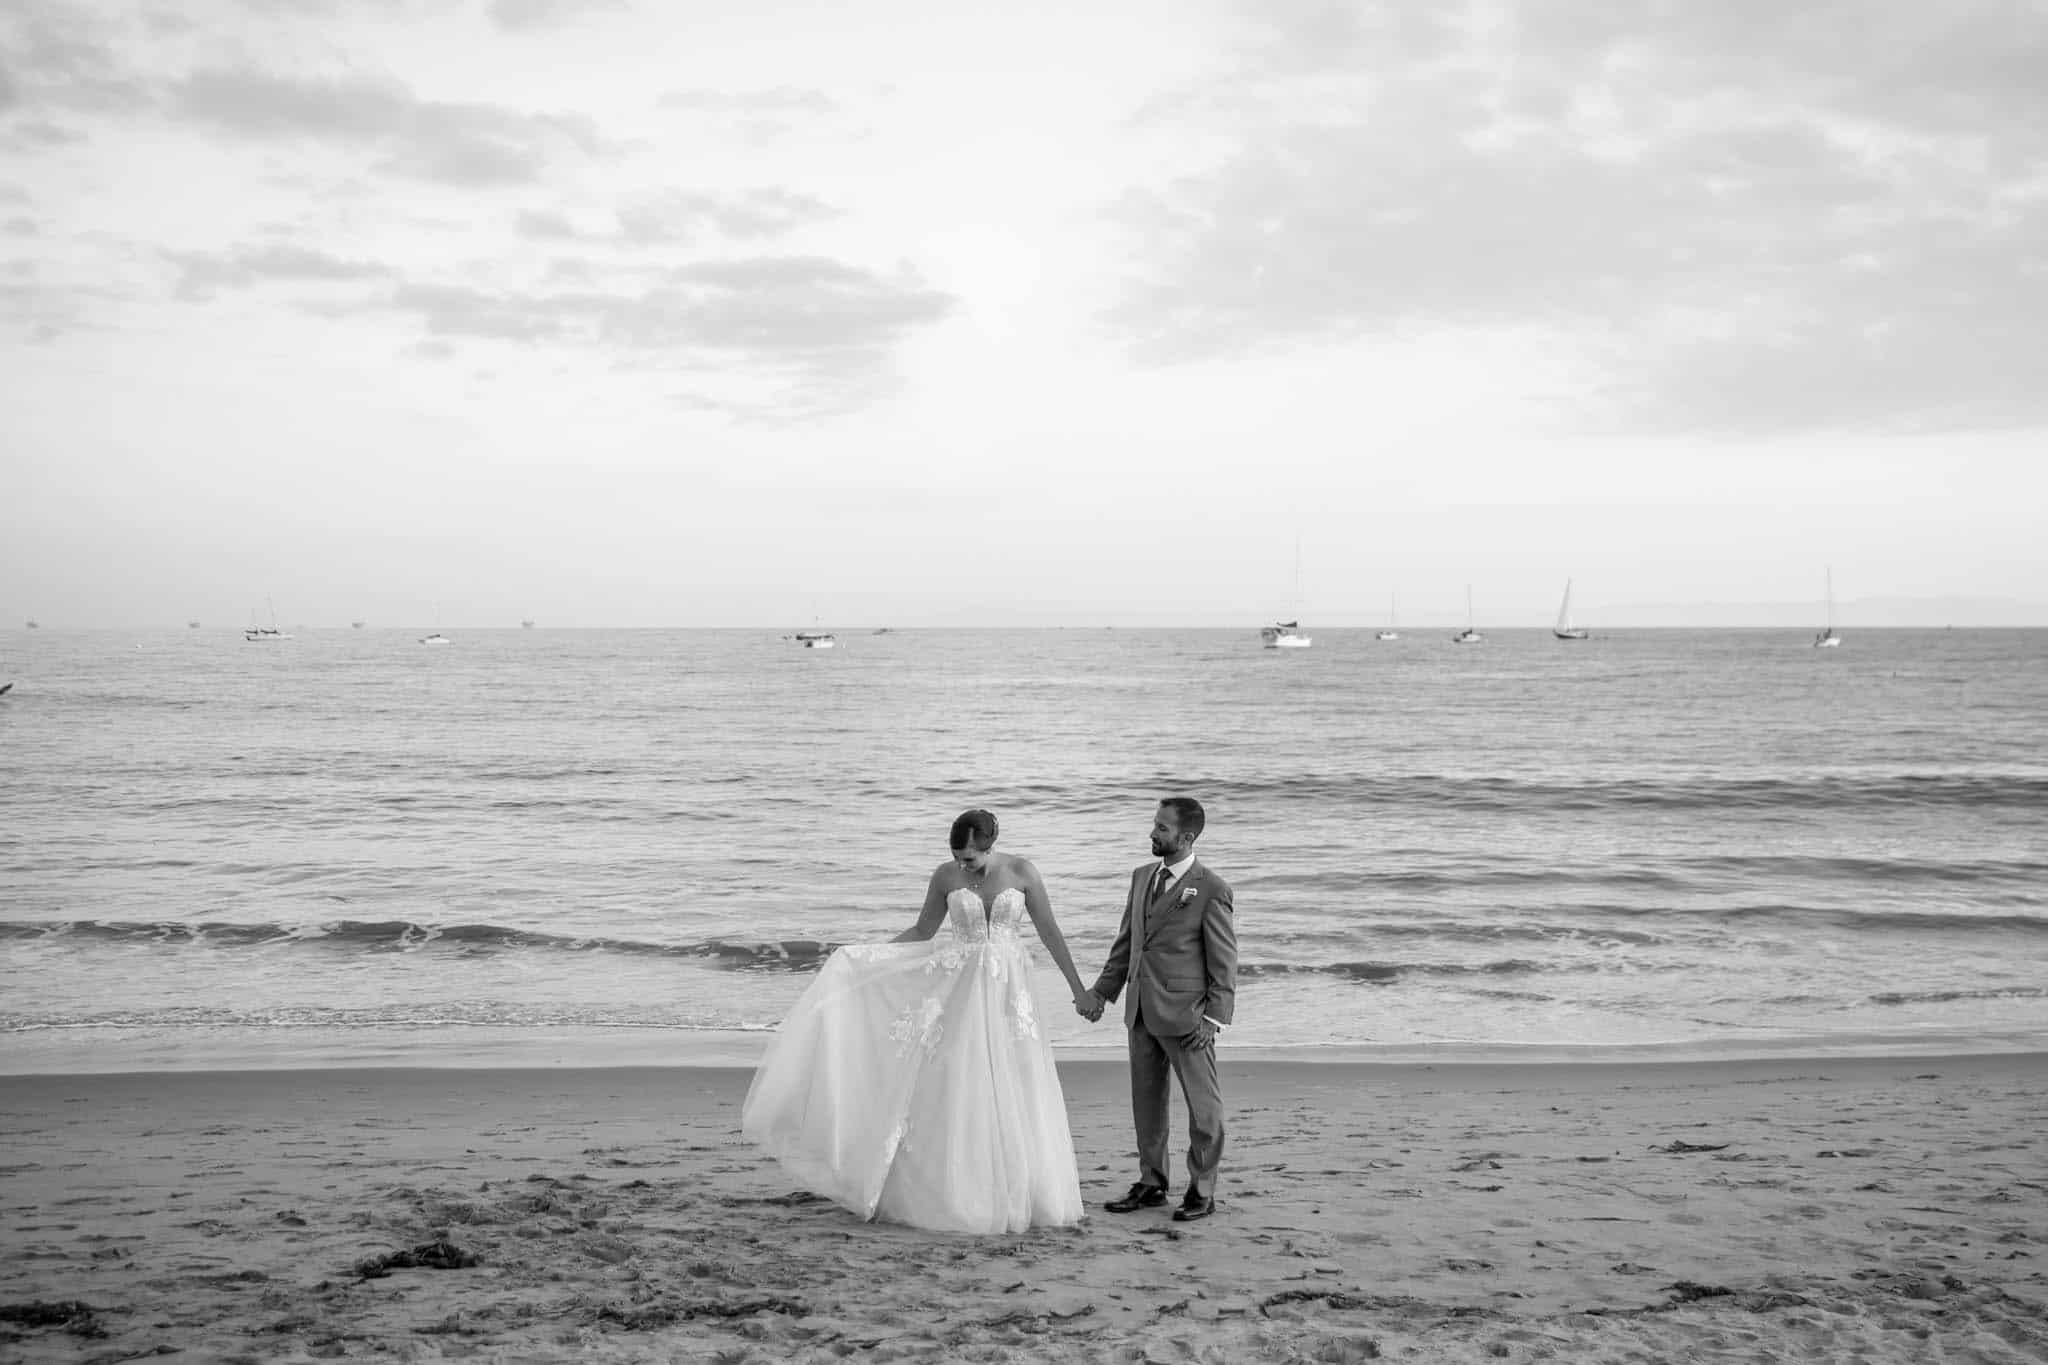 Santa Barbara wedding photographers capture bride and groom walking on the beach together while holding hands with boats int he distance while the bride plays with her dress